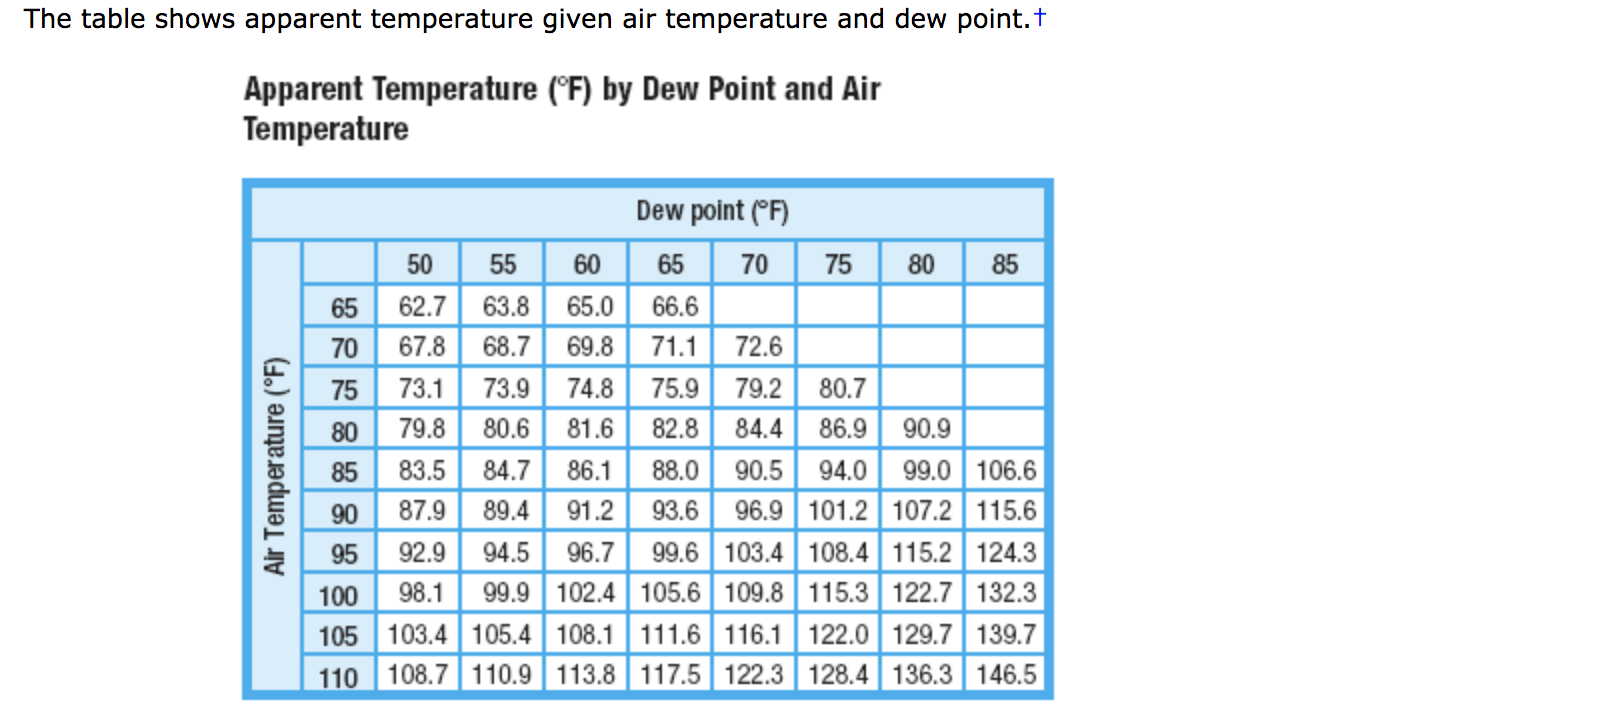 The table shows apparent temperature given air